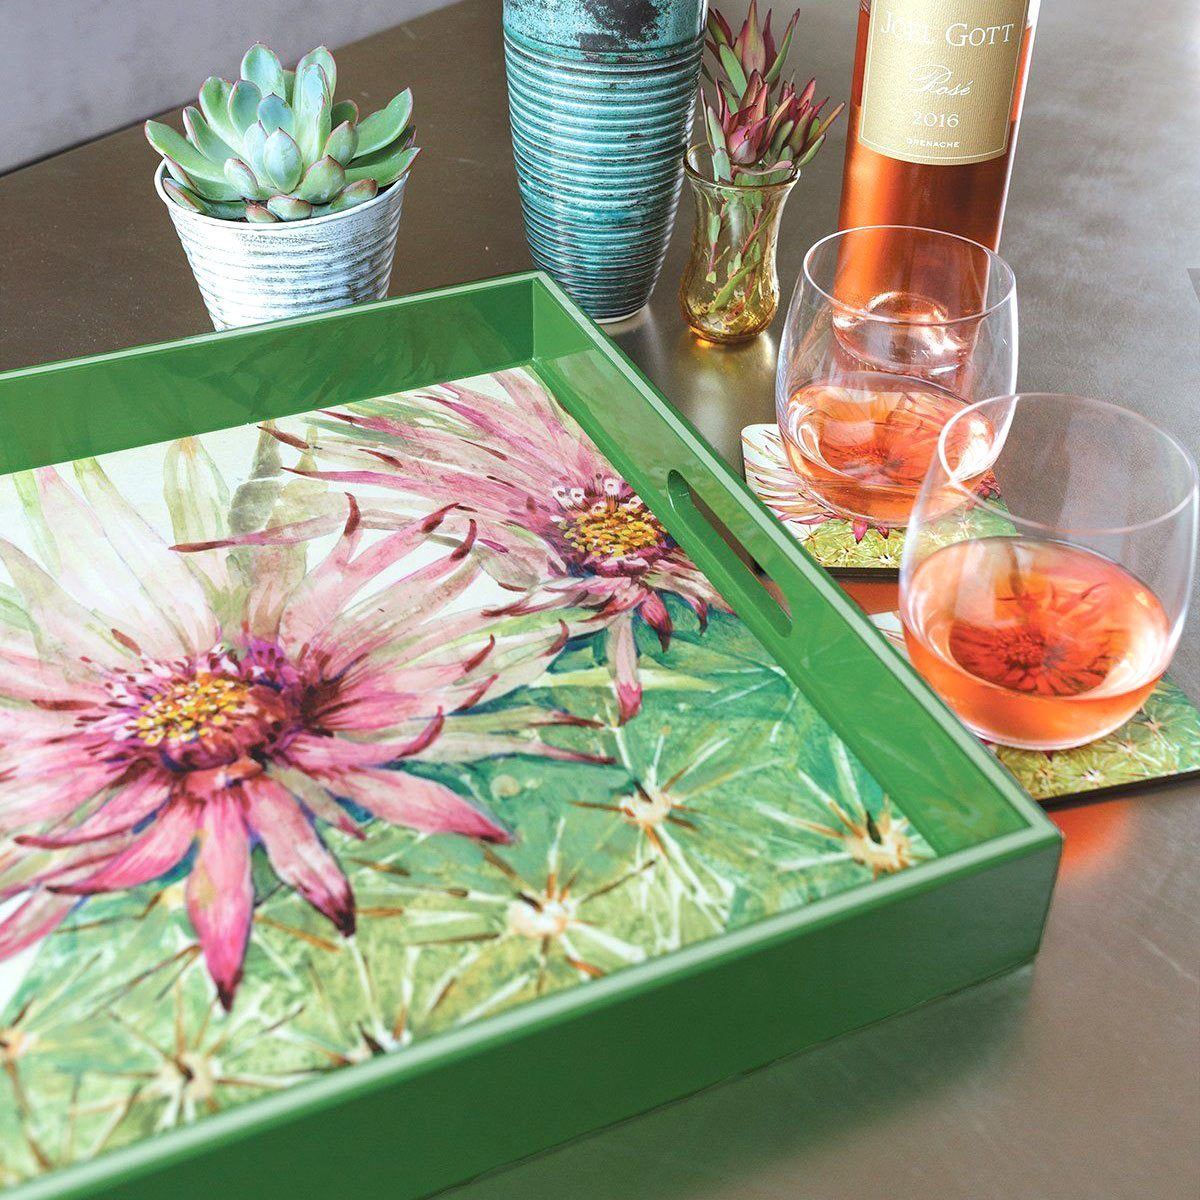 great mother's day gift ideas, like a floral lacquer serving tray and beautiful coasters